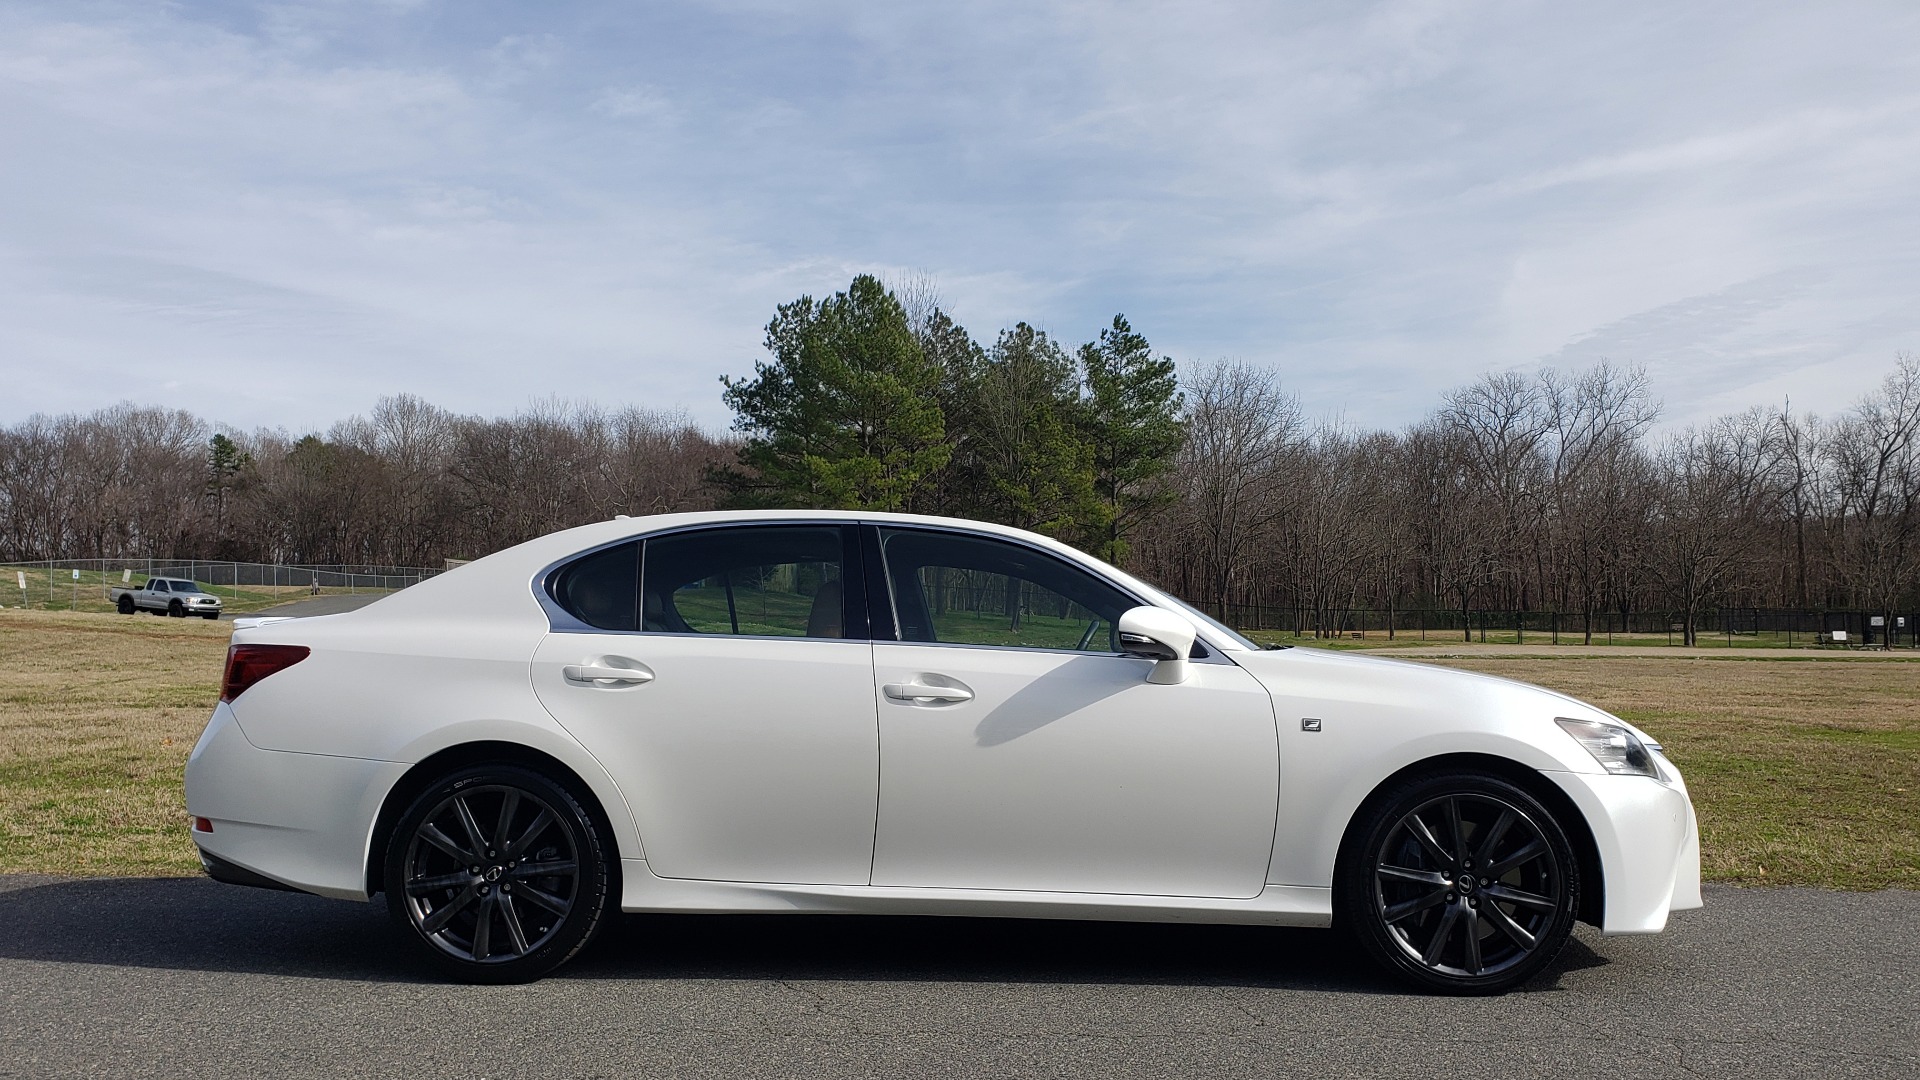 Used 2013 Lexus GS 350 F-SPORT / NAV / SUNROOF / BSM / PRK ASST / REARVIEW for sale Sold at Formula Imports in Charlotte NC 28227 7